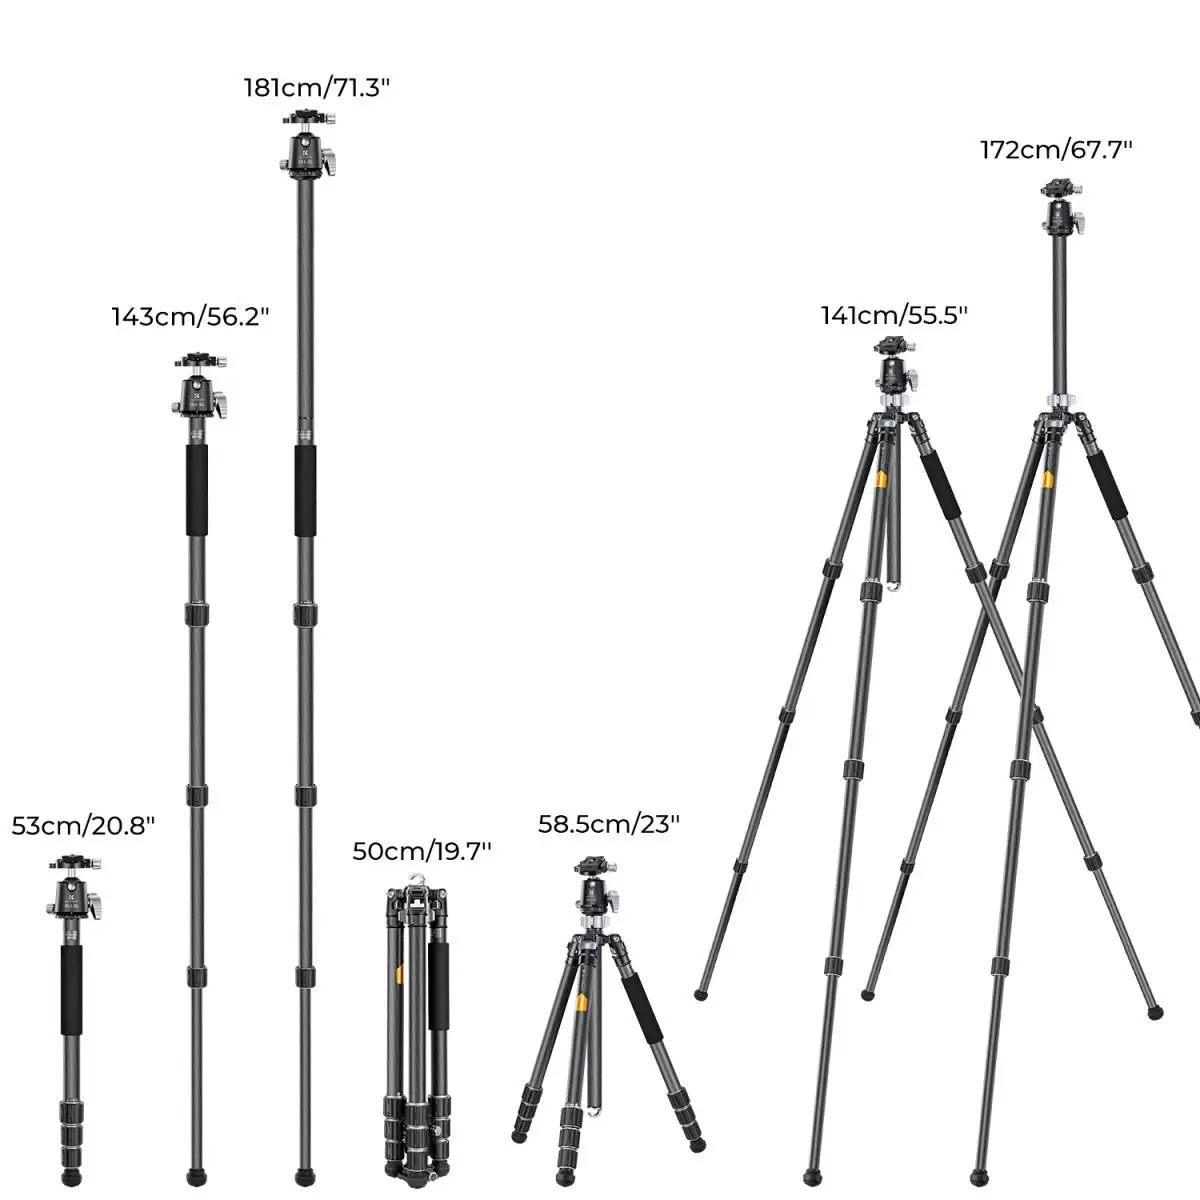 K&F Concept 68''/1.7m Carbon Fiber Camera Tripod Professional Photography Tripod with 36mm Metal Ball Head Capacity 16KG/35.2lbs images - 6